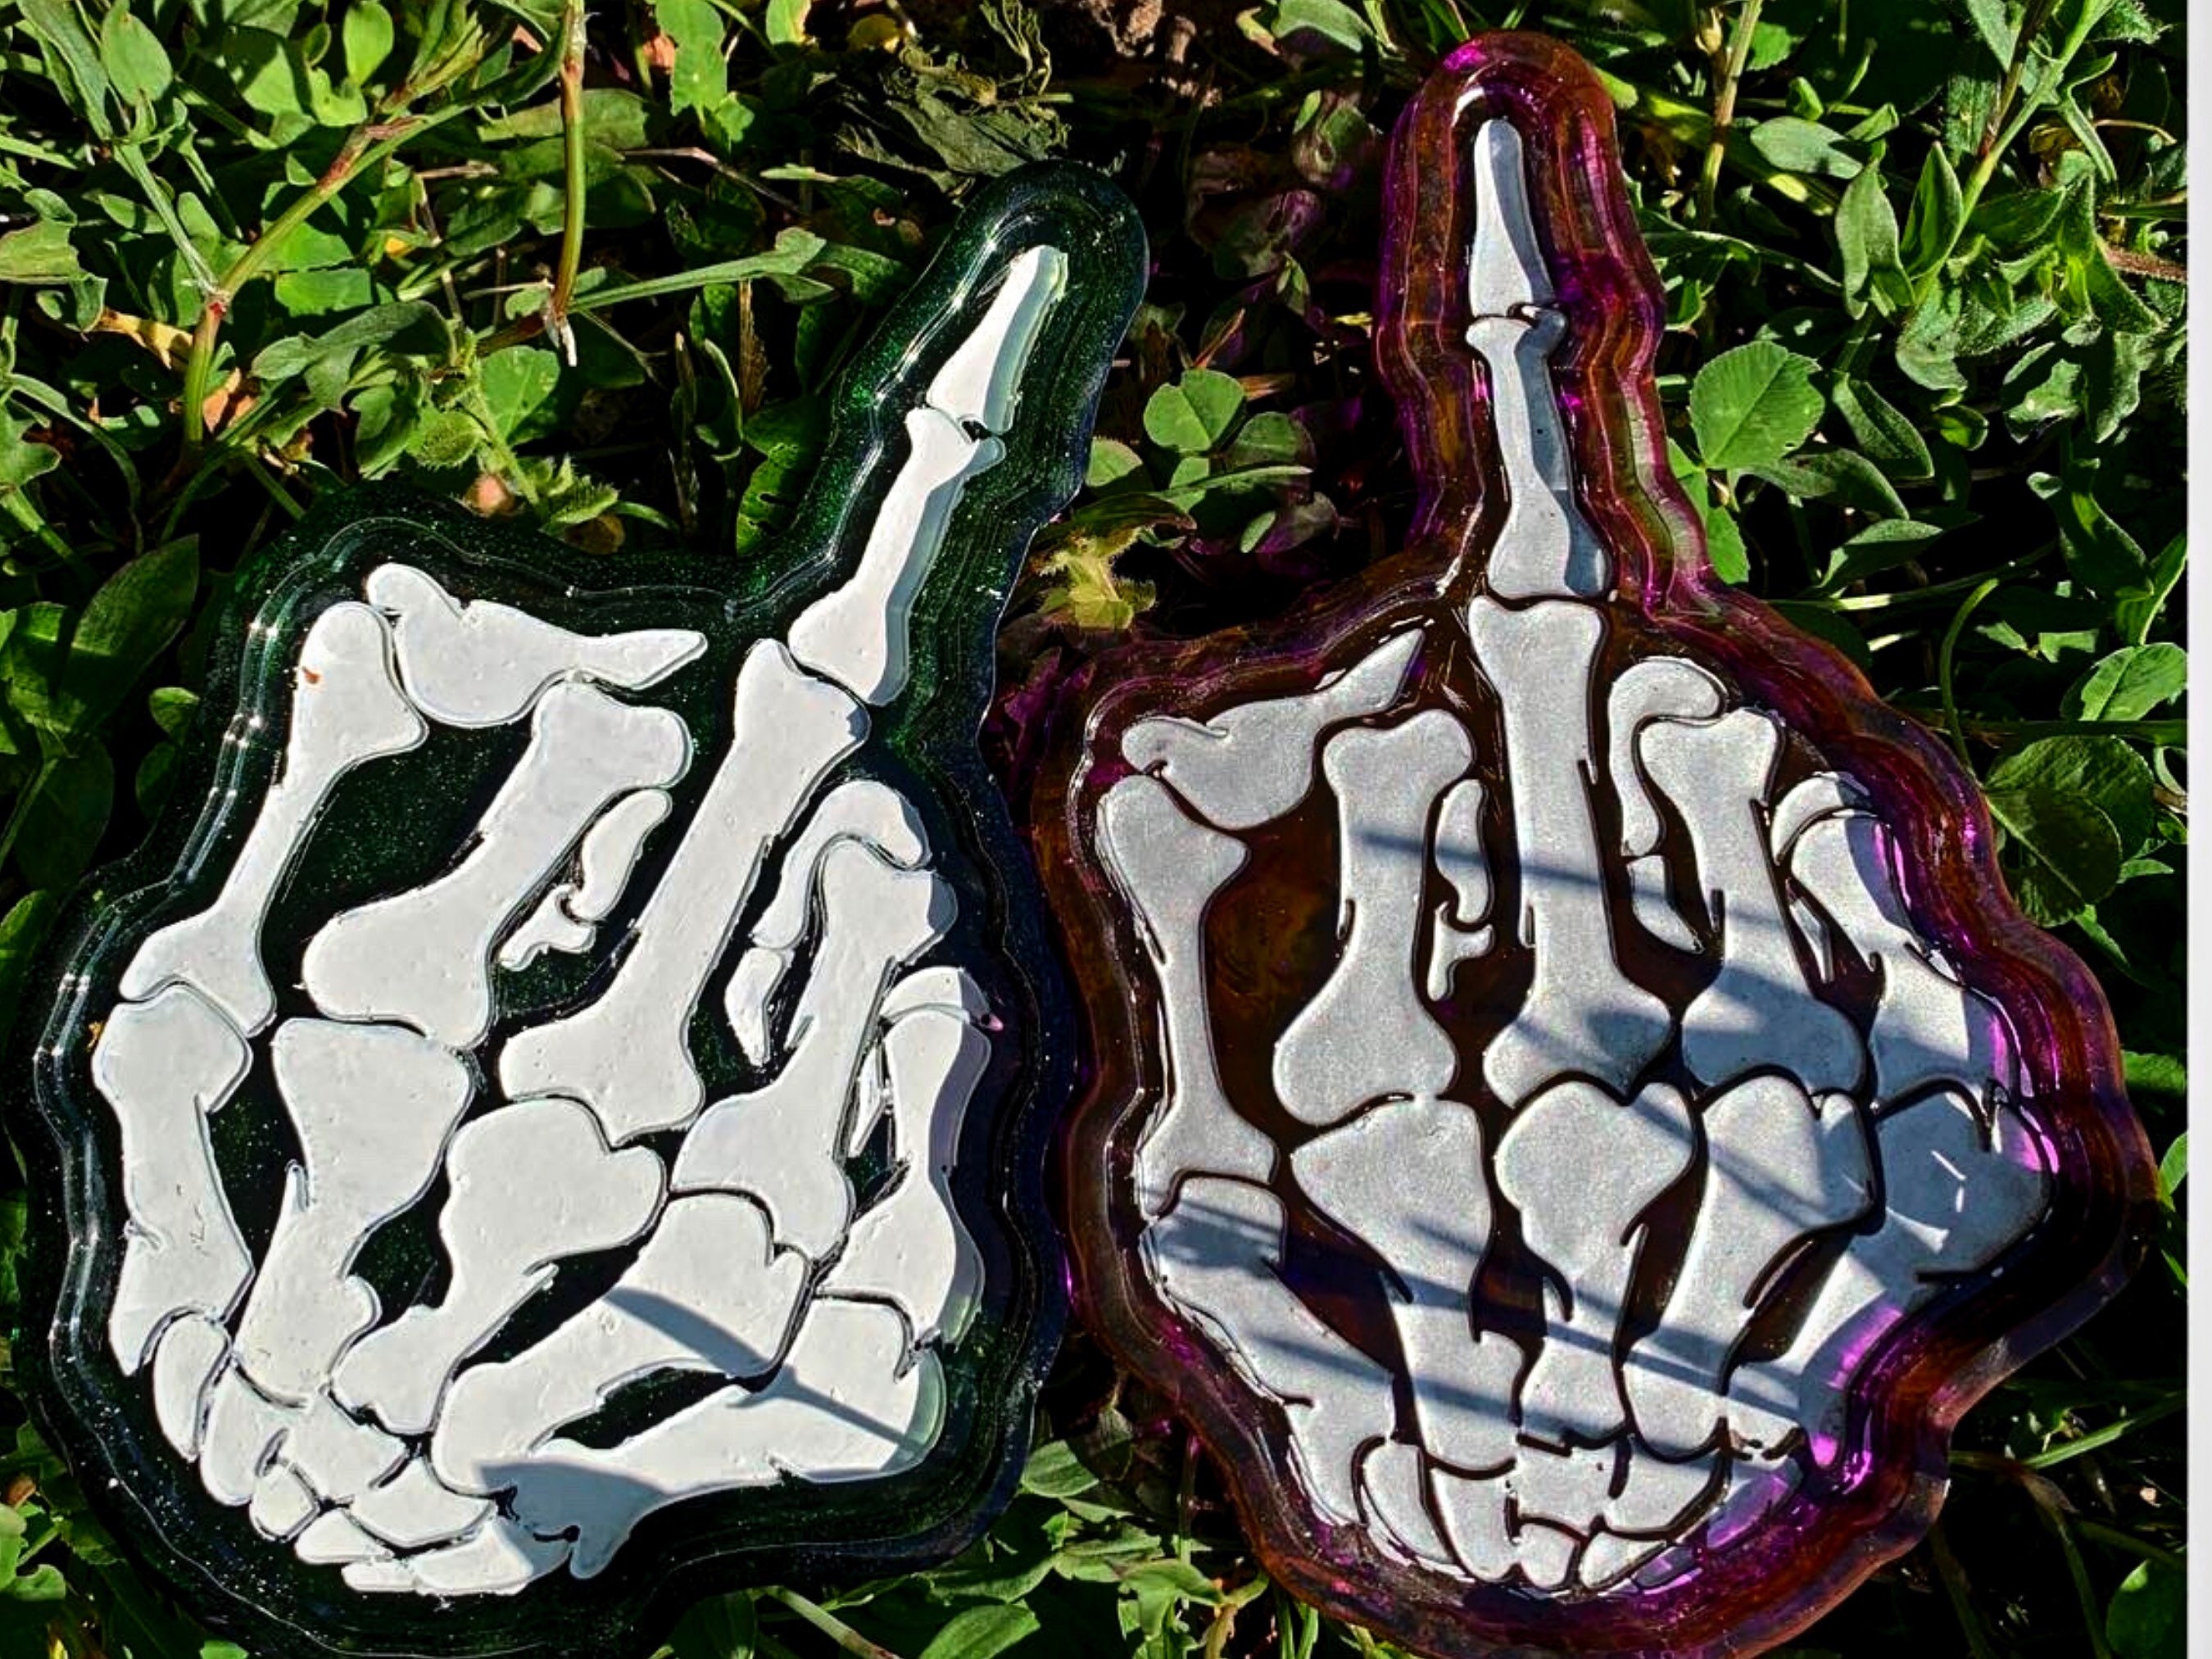 Middle Finger Tray, FU Dish, Jewelry Tray, Grunge Room Decor